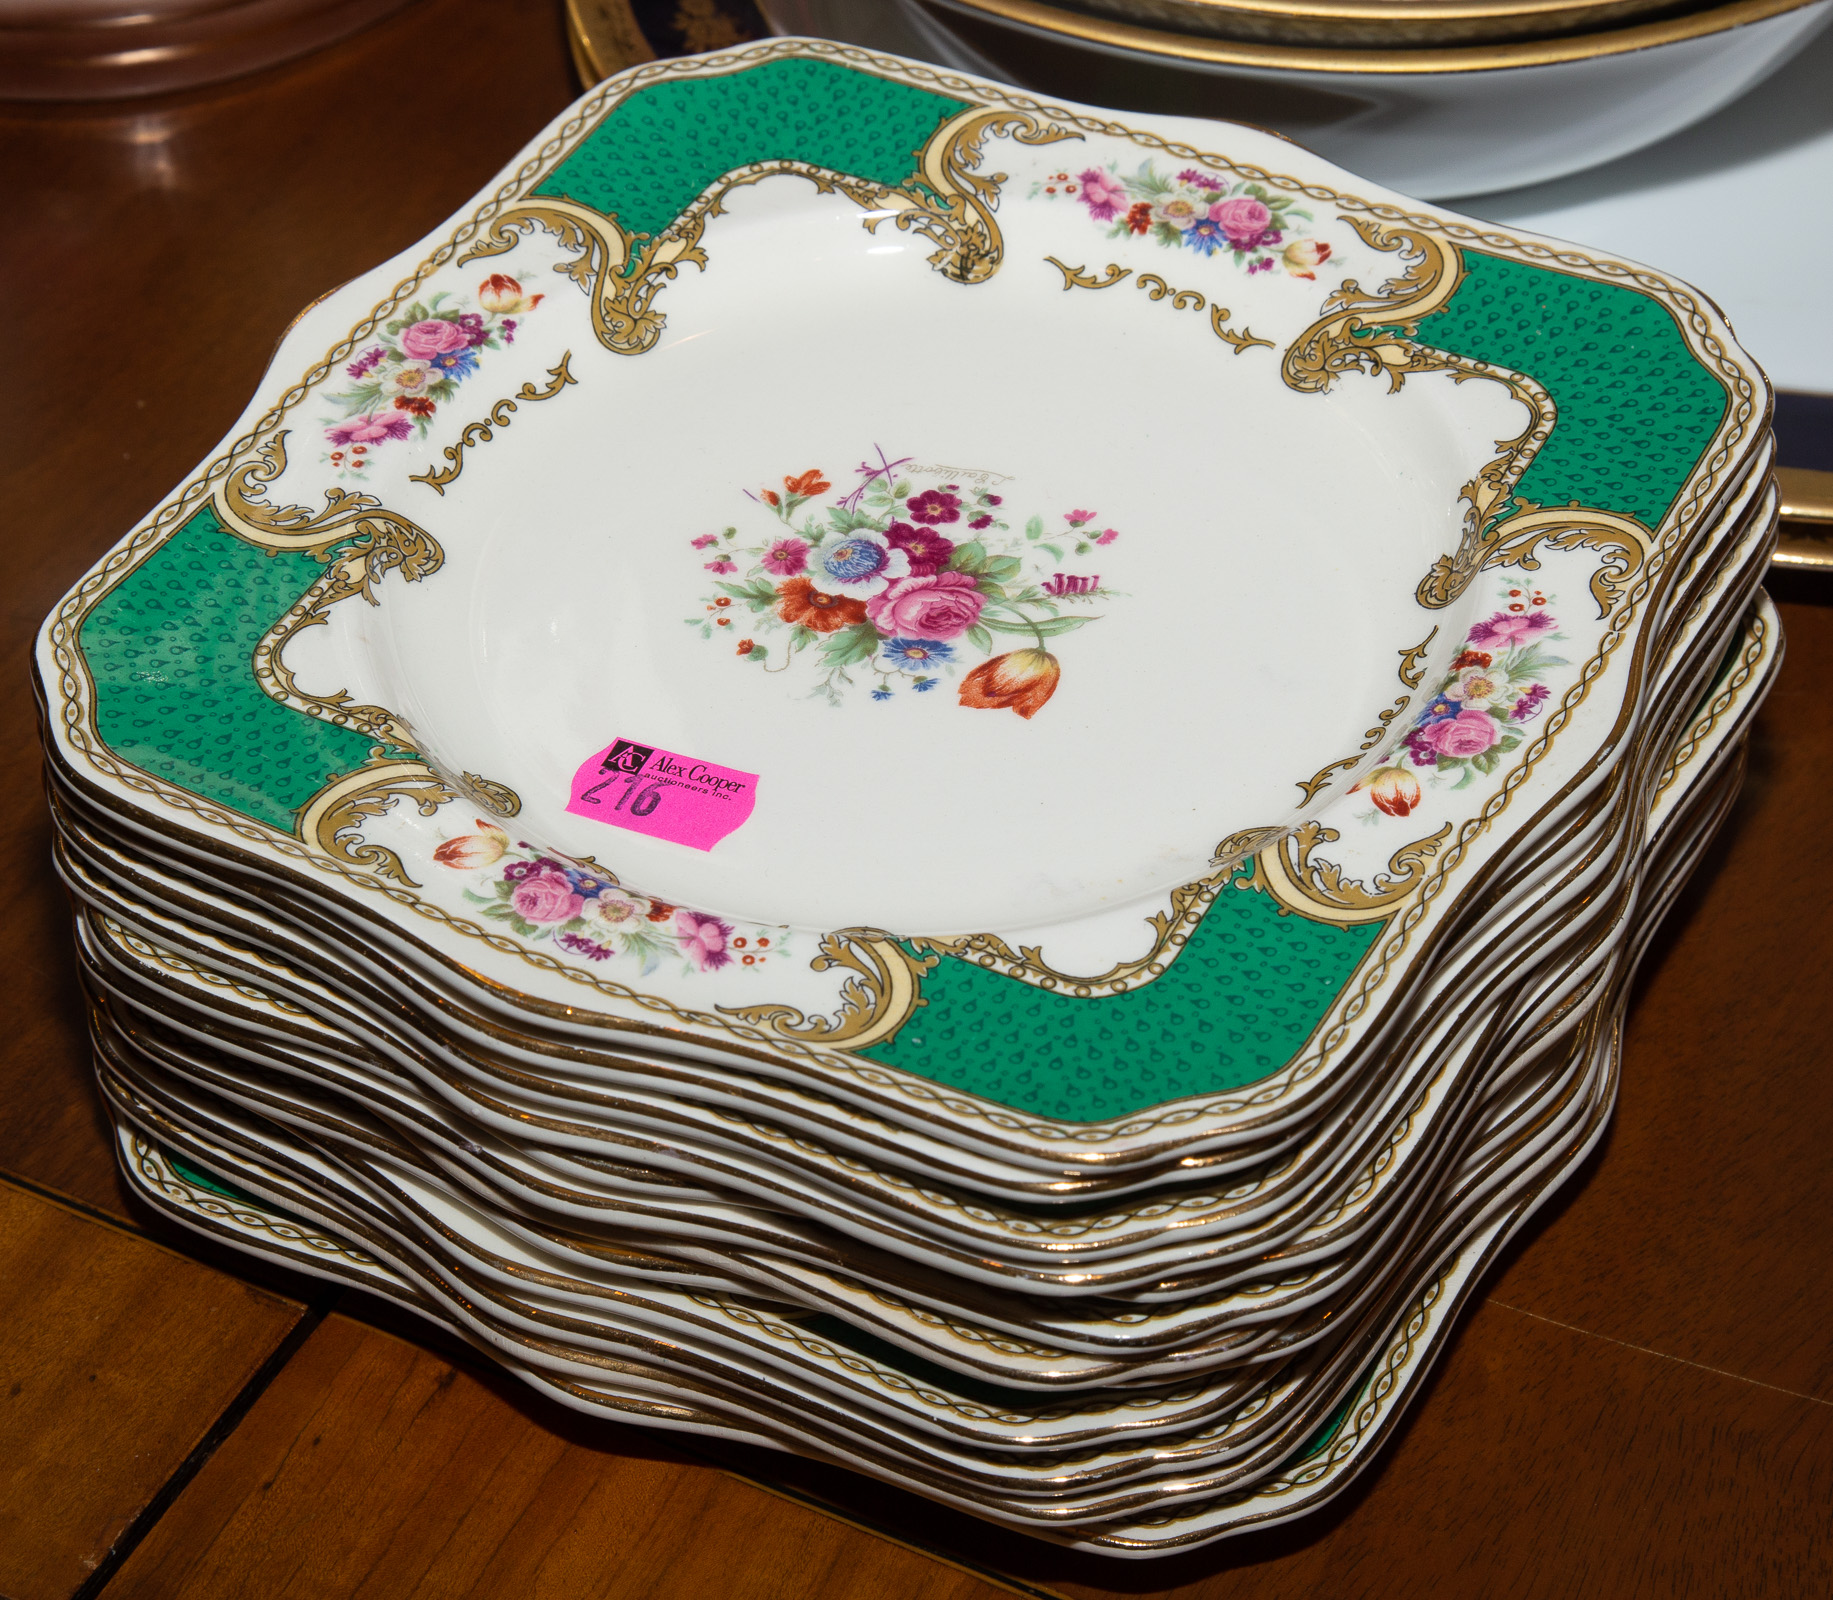 12 STAFFORDSHIRE PLATES Including